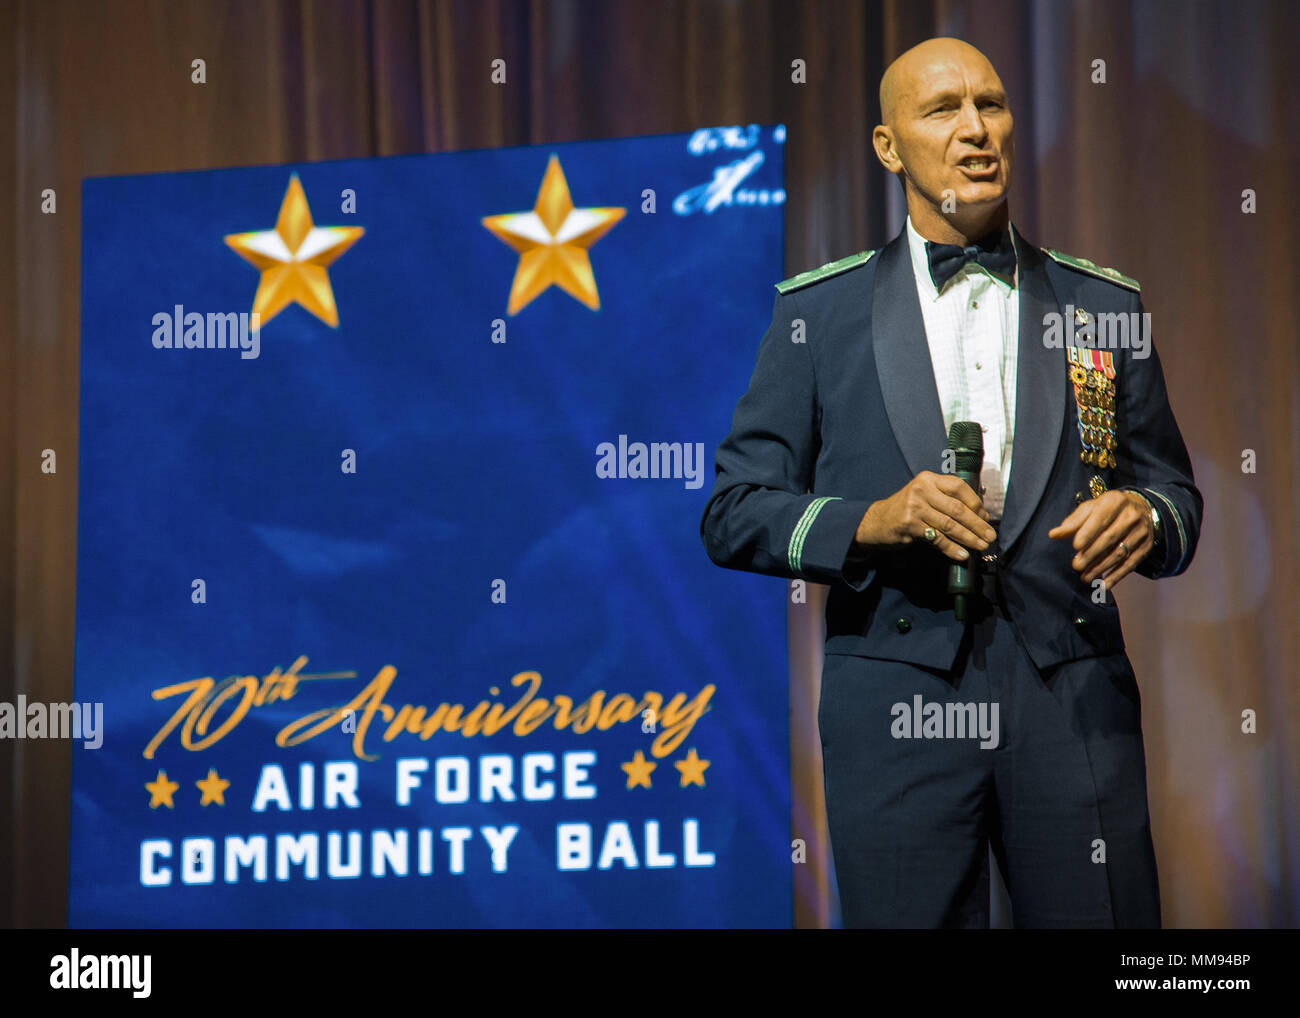 Major General Timothy M. Zadalis, United States Air Forces in Europe-Air Forces in Africa Vice Commander, speaks at the 70th Anniversary Community Air Force Ball Sept. 16, 2017, at Vance Air Force Base in Enid, Okla. Zadalis began his Air Force career in 1984 as a student in specialized undergraduate pilot training at Vance. (U.S. Air Force photo by Airman Zachary Heal) Stock Photo